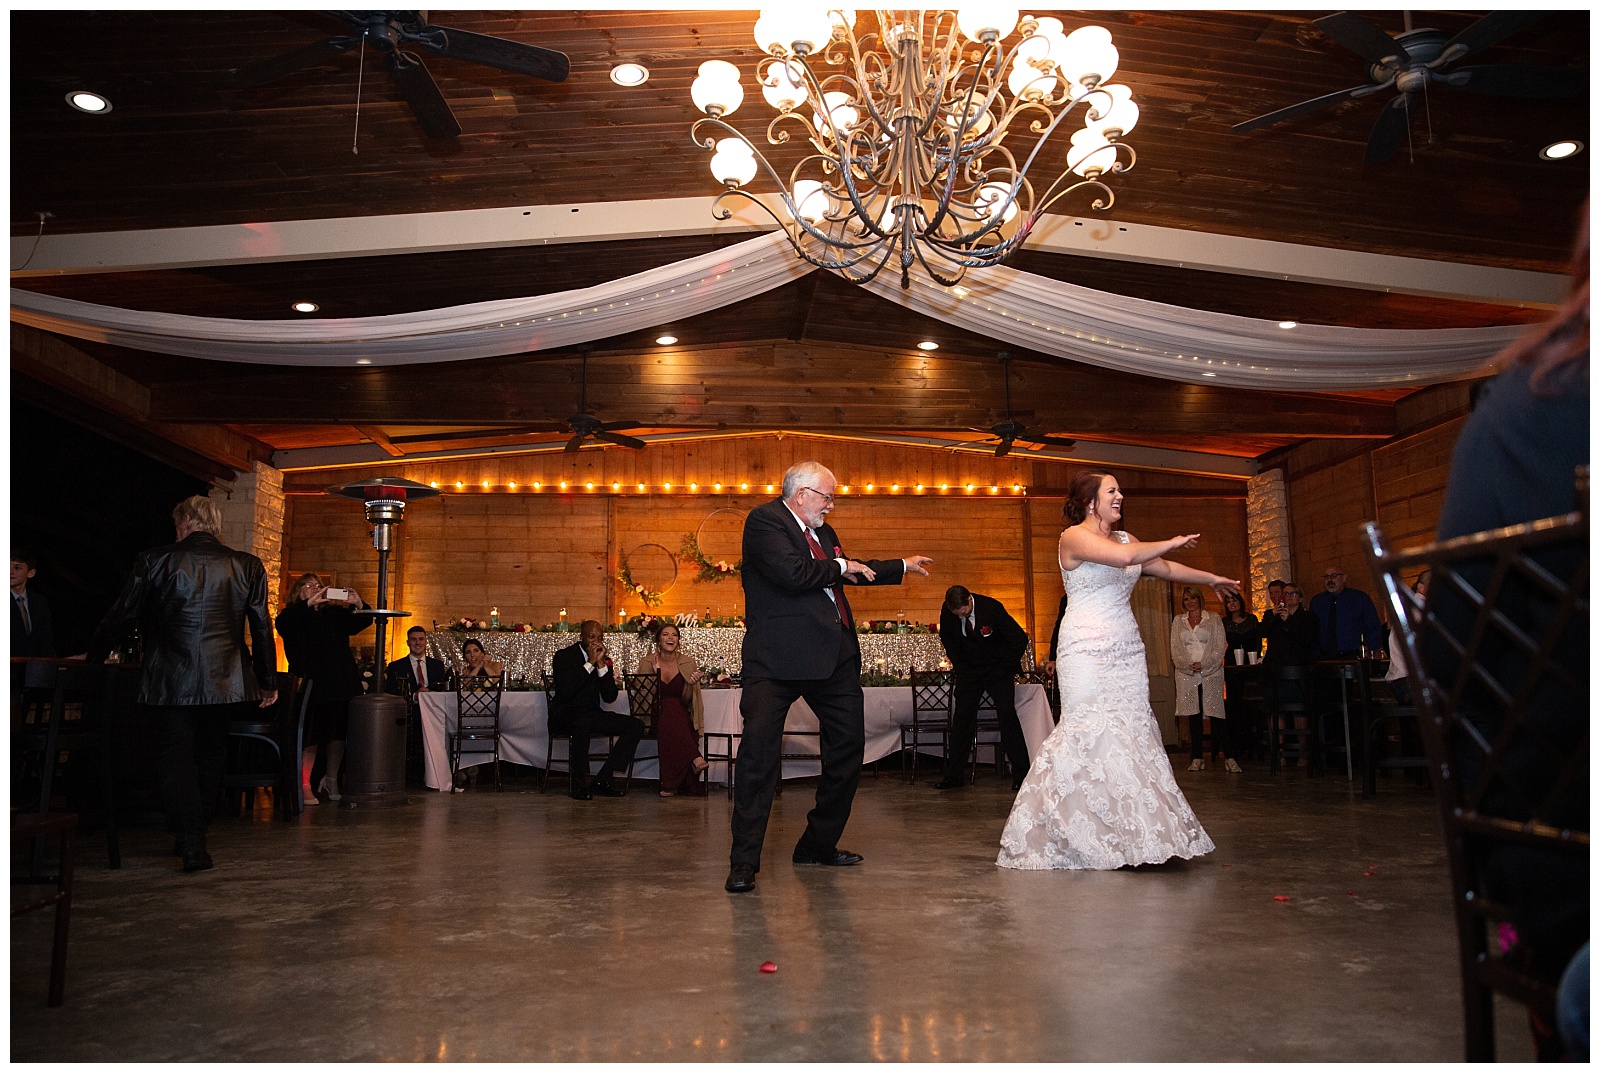 Father and daughter fun dance | Glam Burgundy and Blush wedding at Emery's Buffalo Creek 